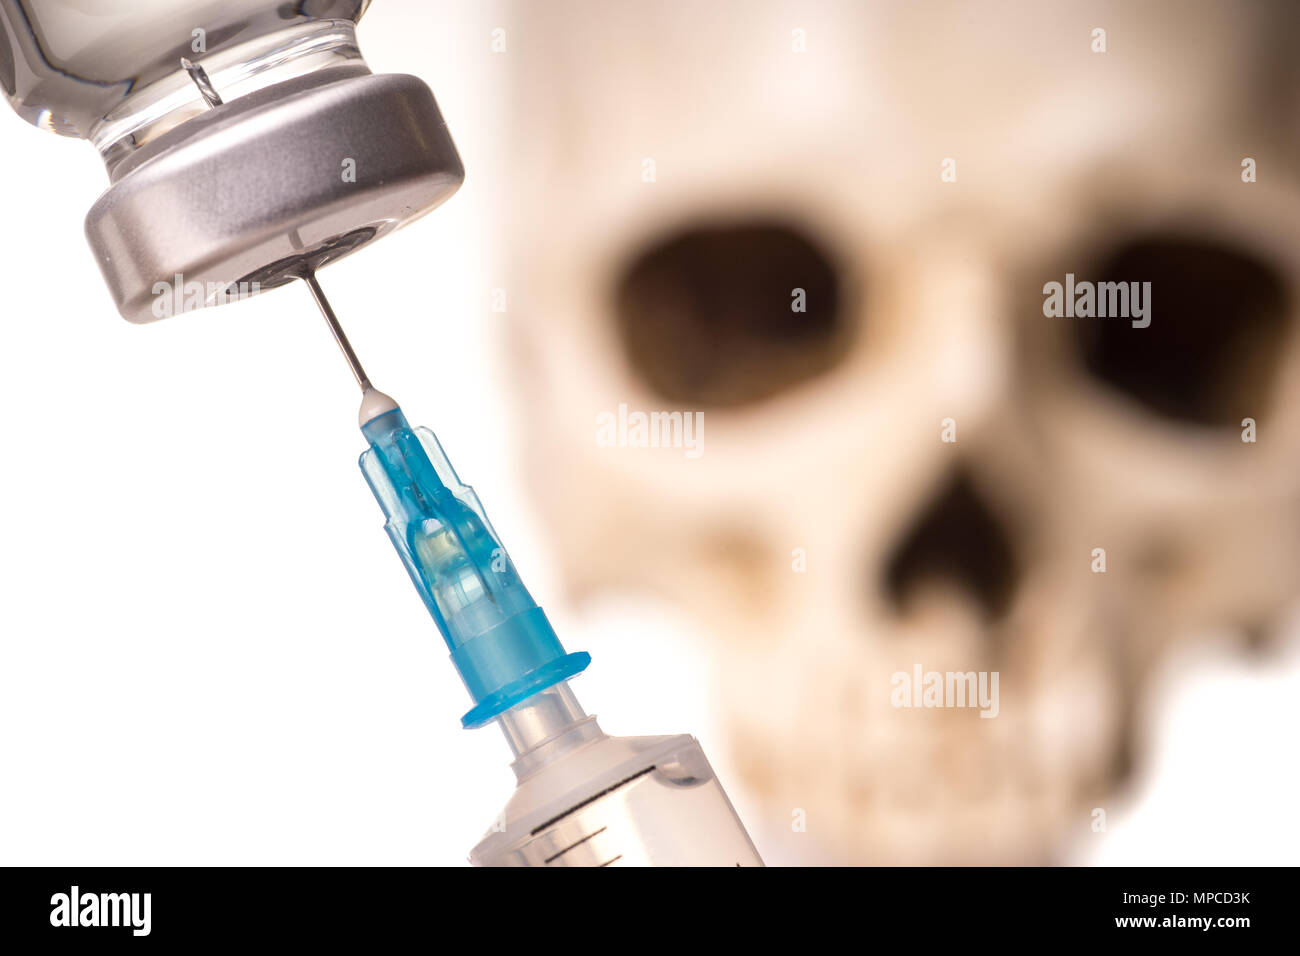 Blurry Skull and syringe with liquid substans, isolated on whte background Stock Photo